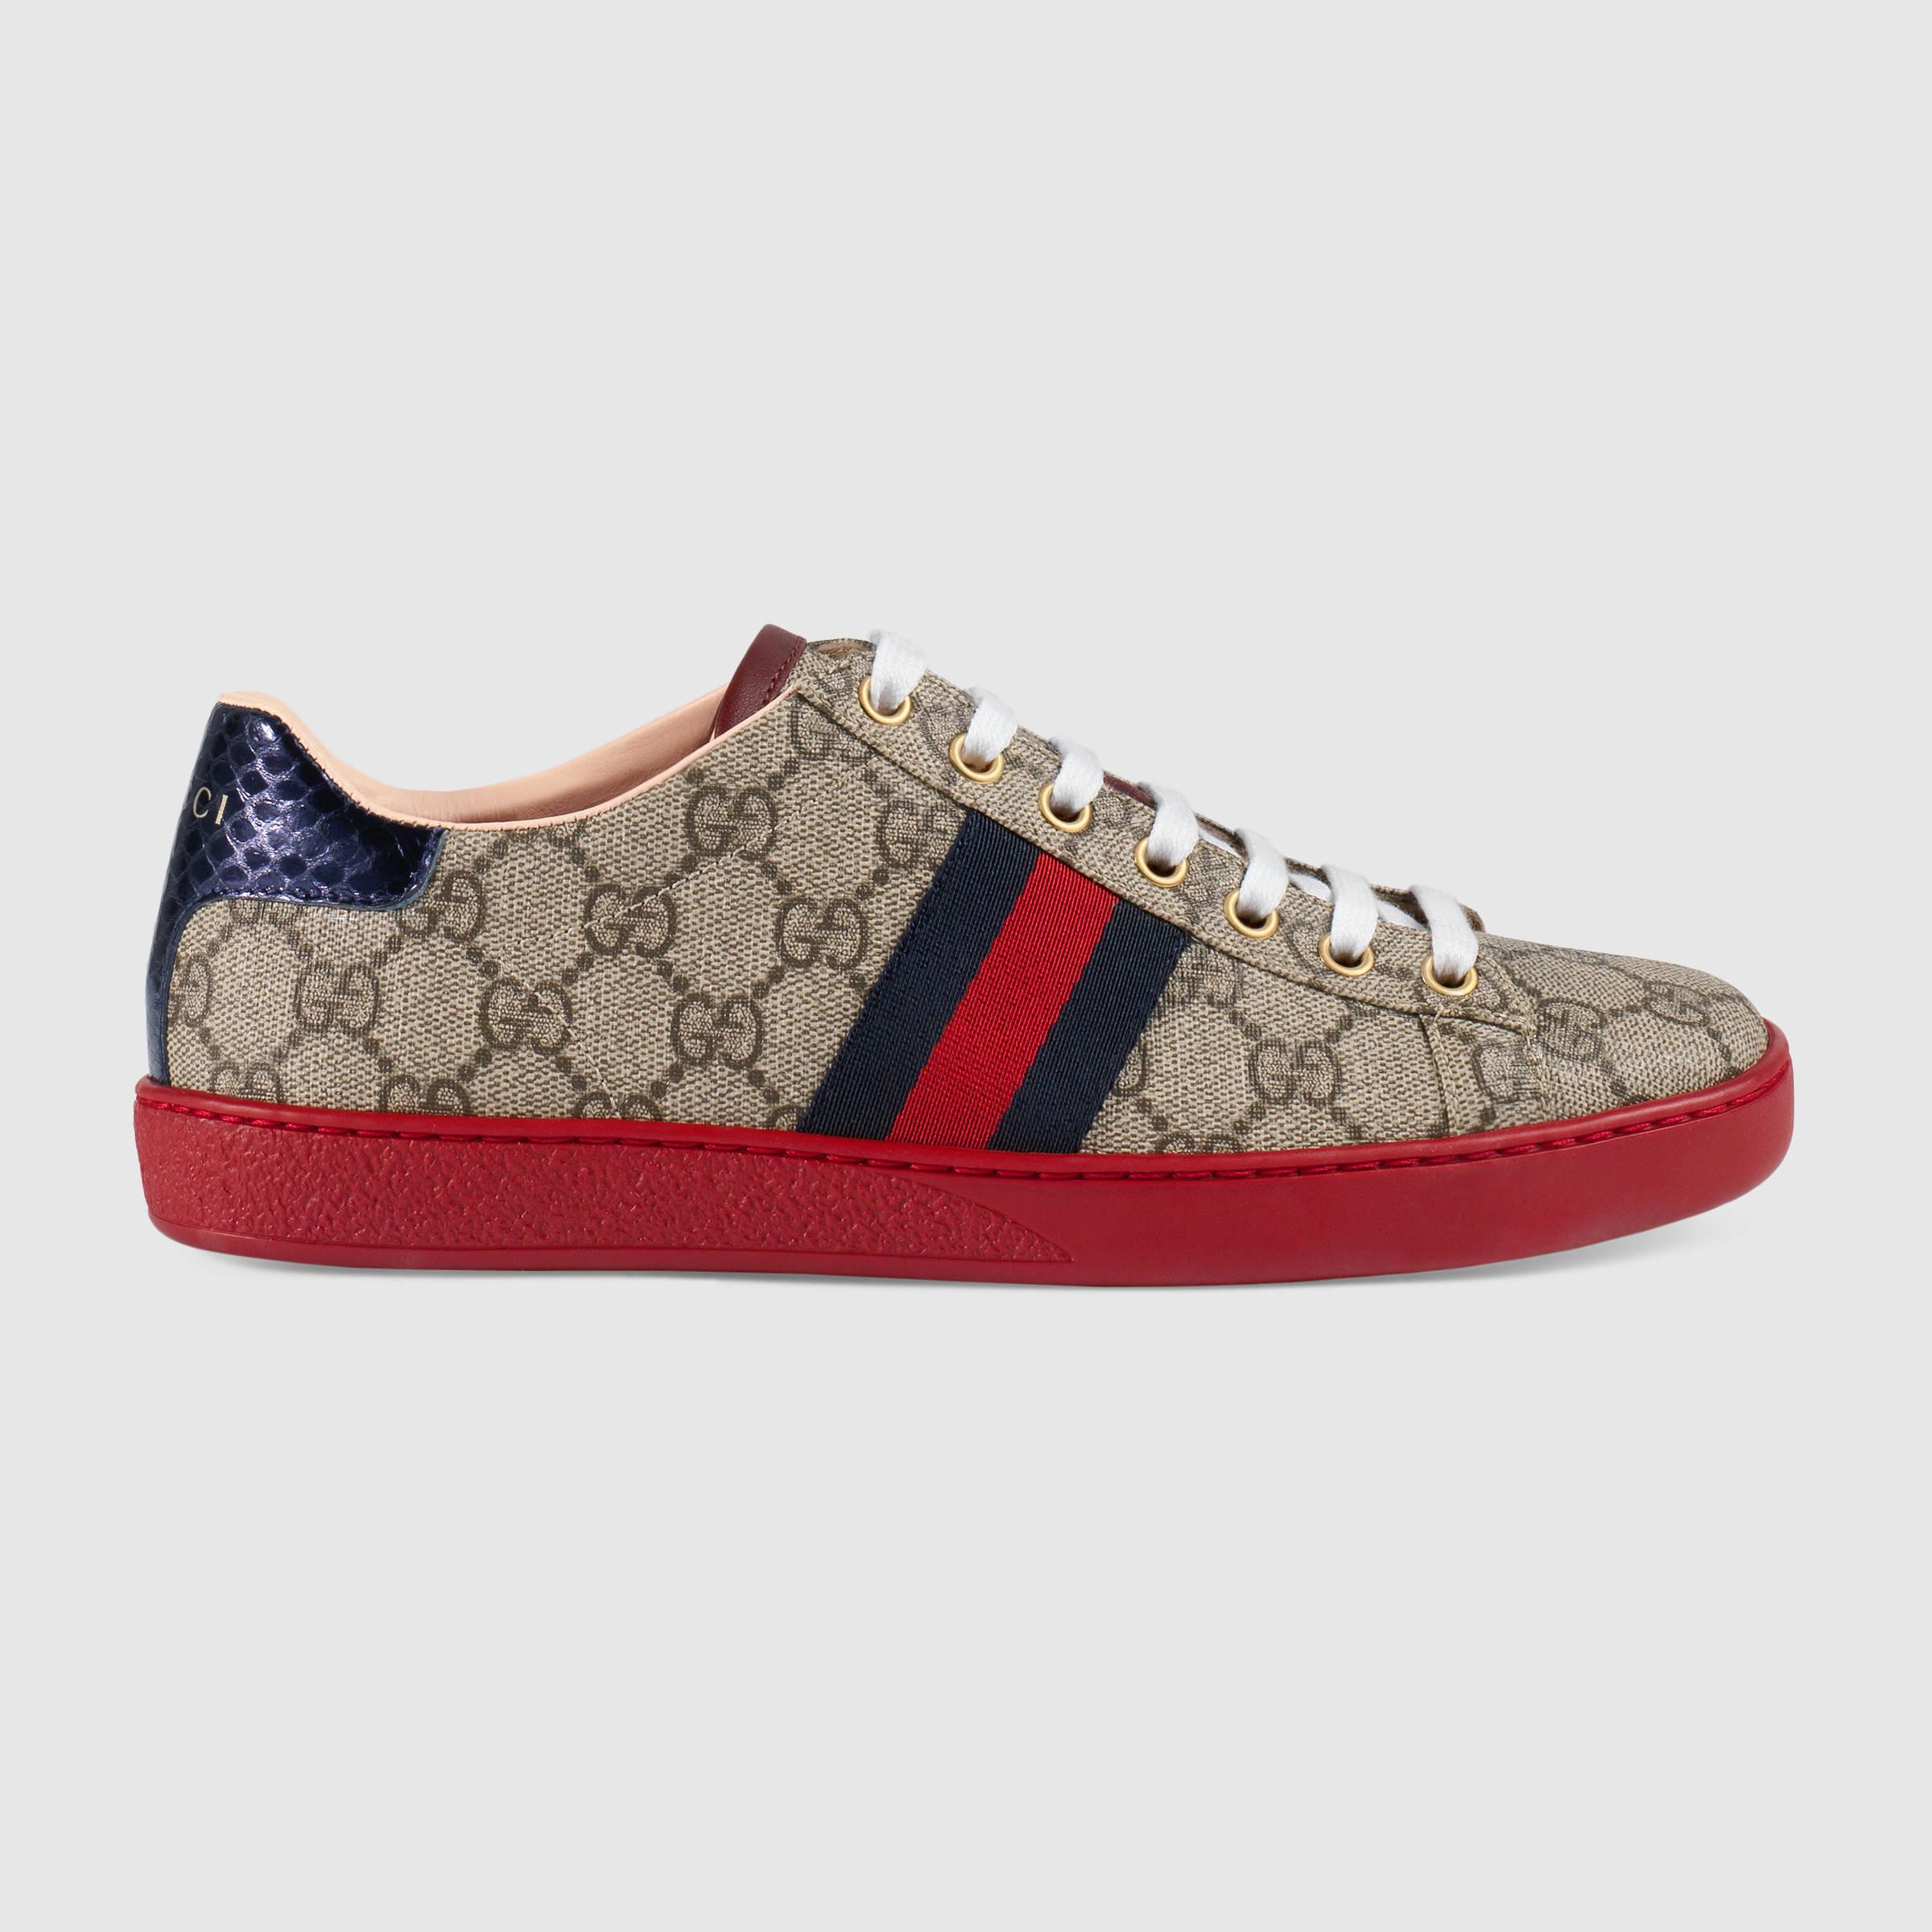 Gucci Ace GG Supreme Low-top Sneaker in Gray - Lyst